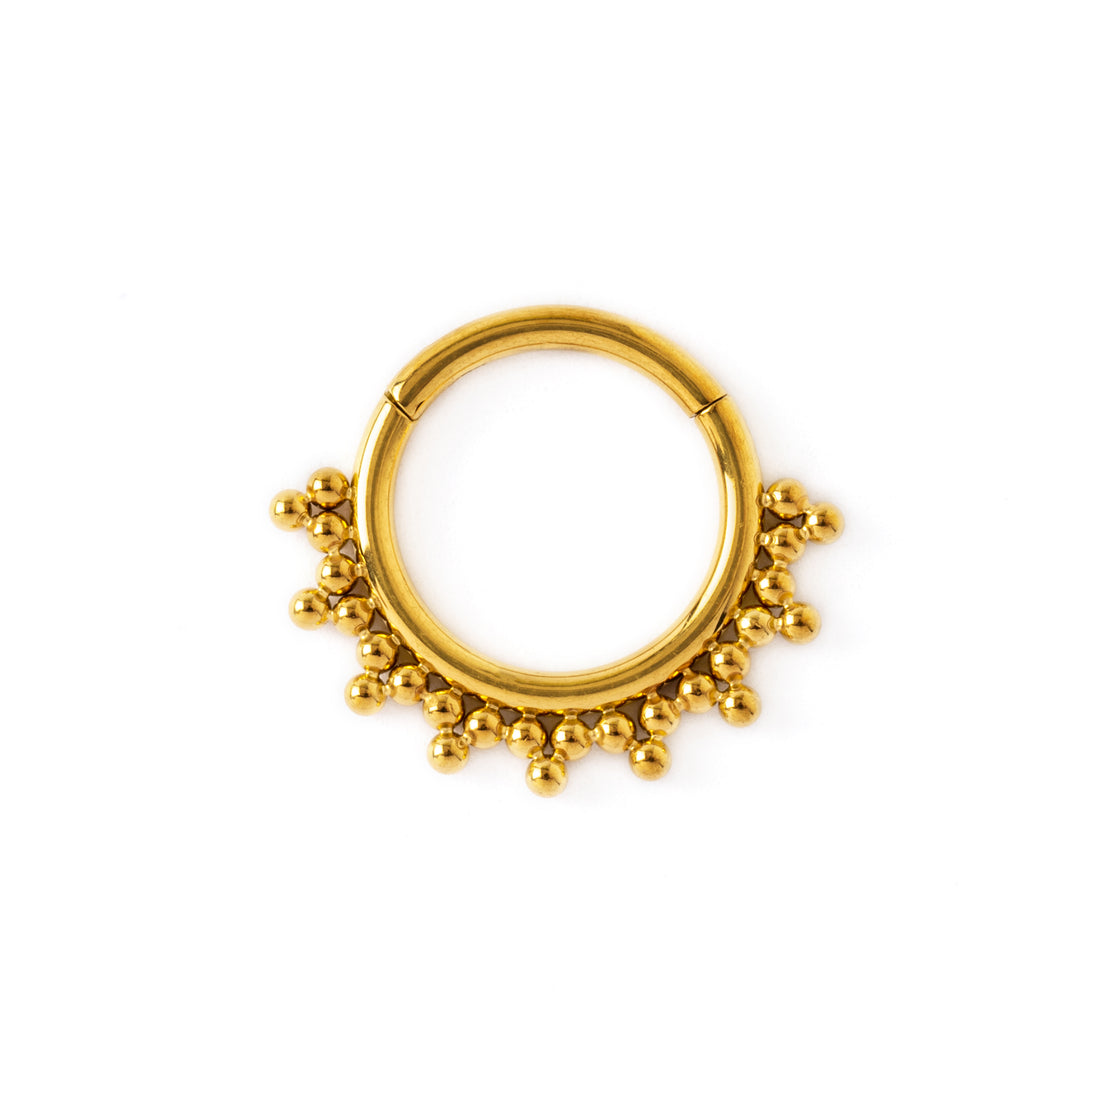 Sarika gold surgical steel septum clicker frontal view